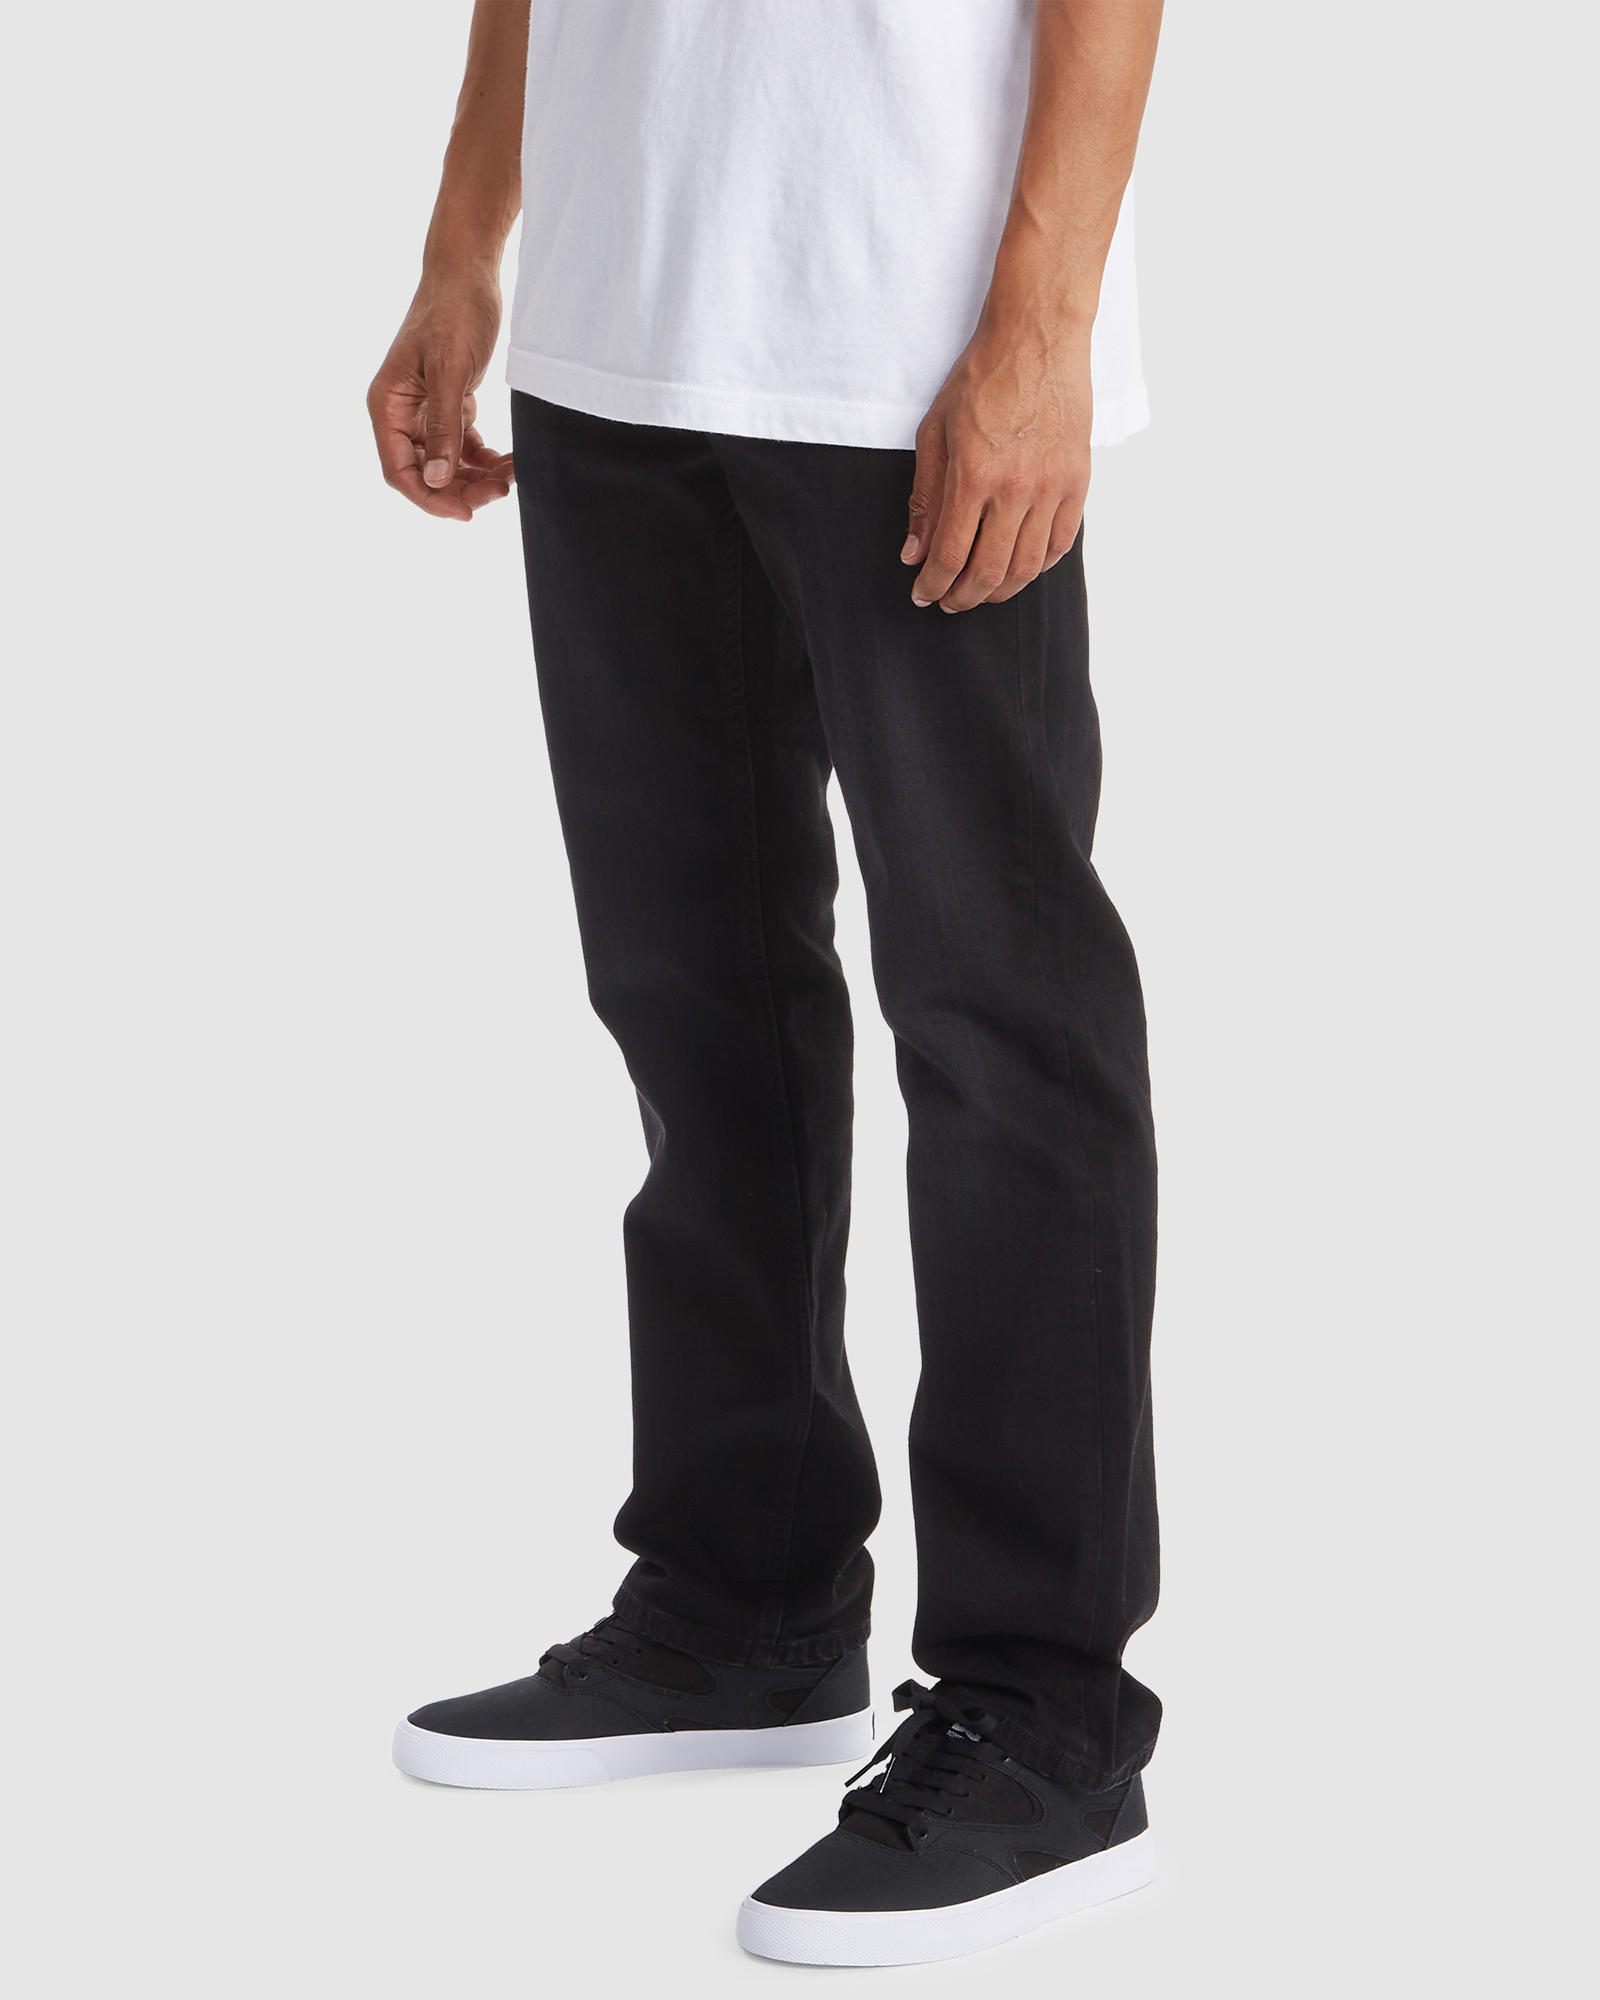 Mens Worker Straight Denim Sbw by DC SHOES | Amazon Surf